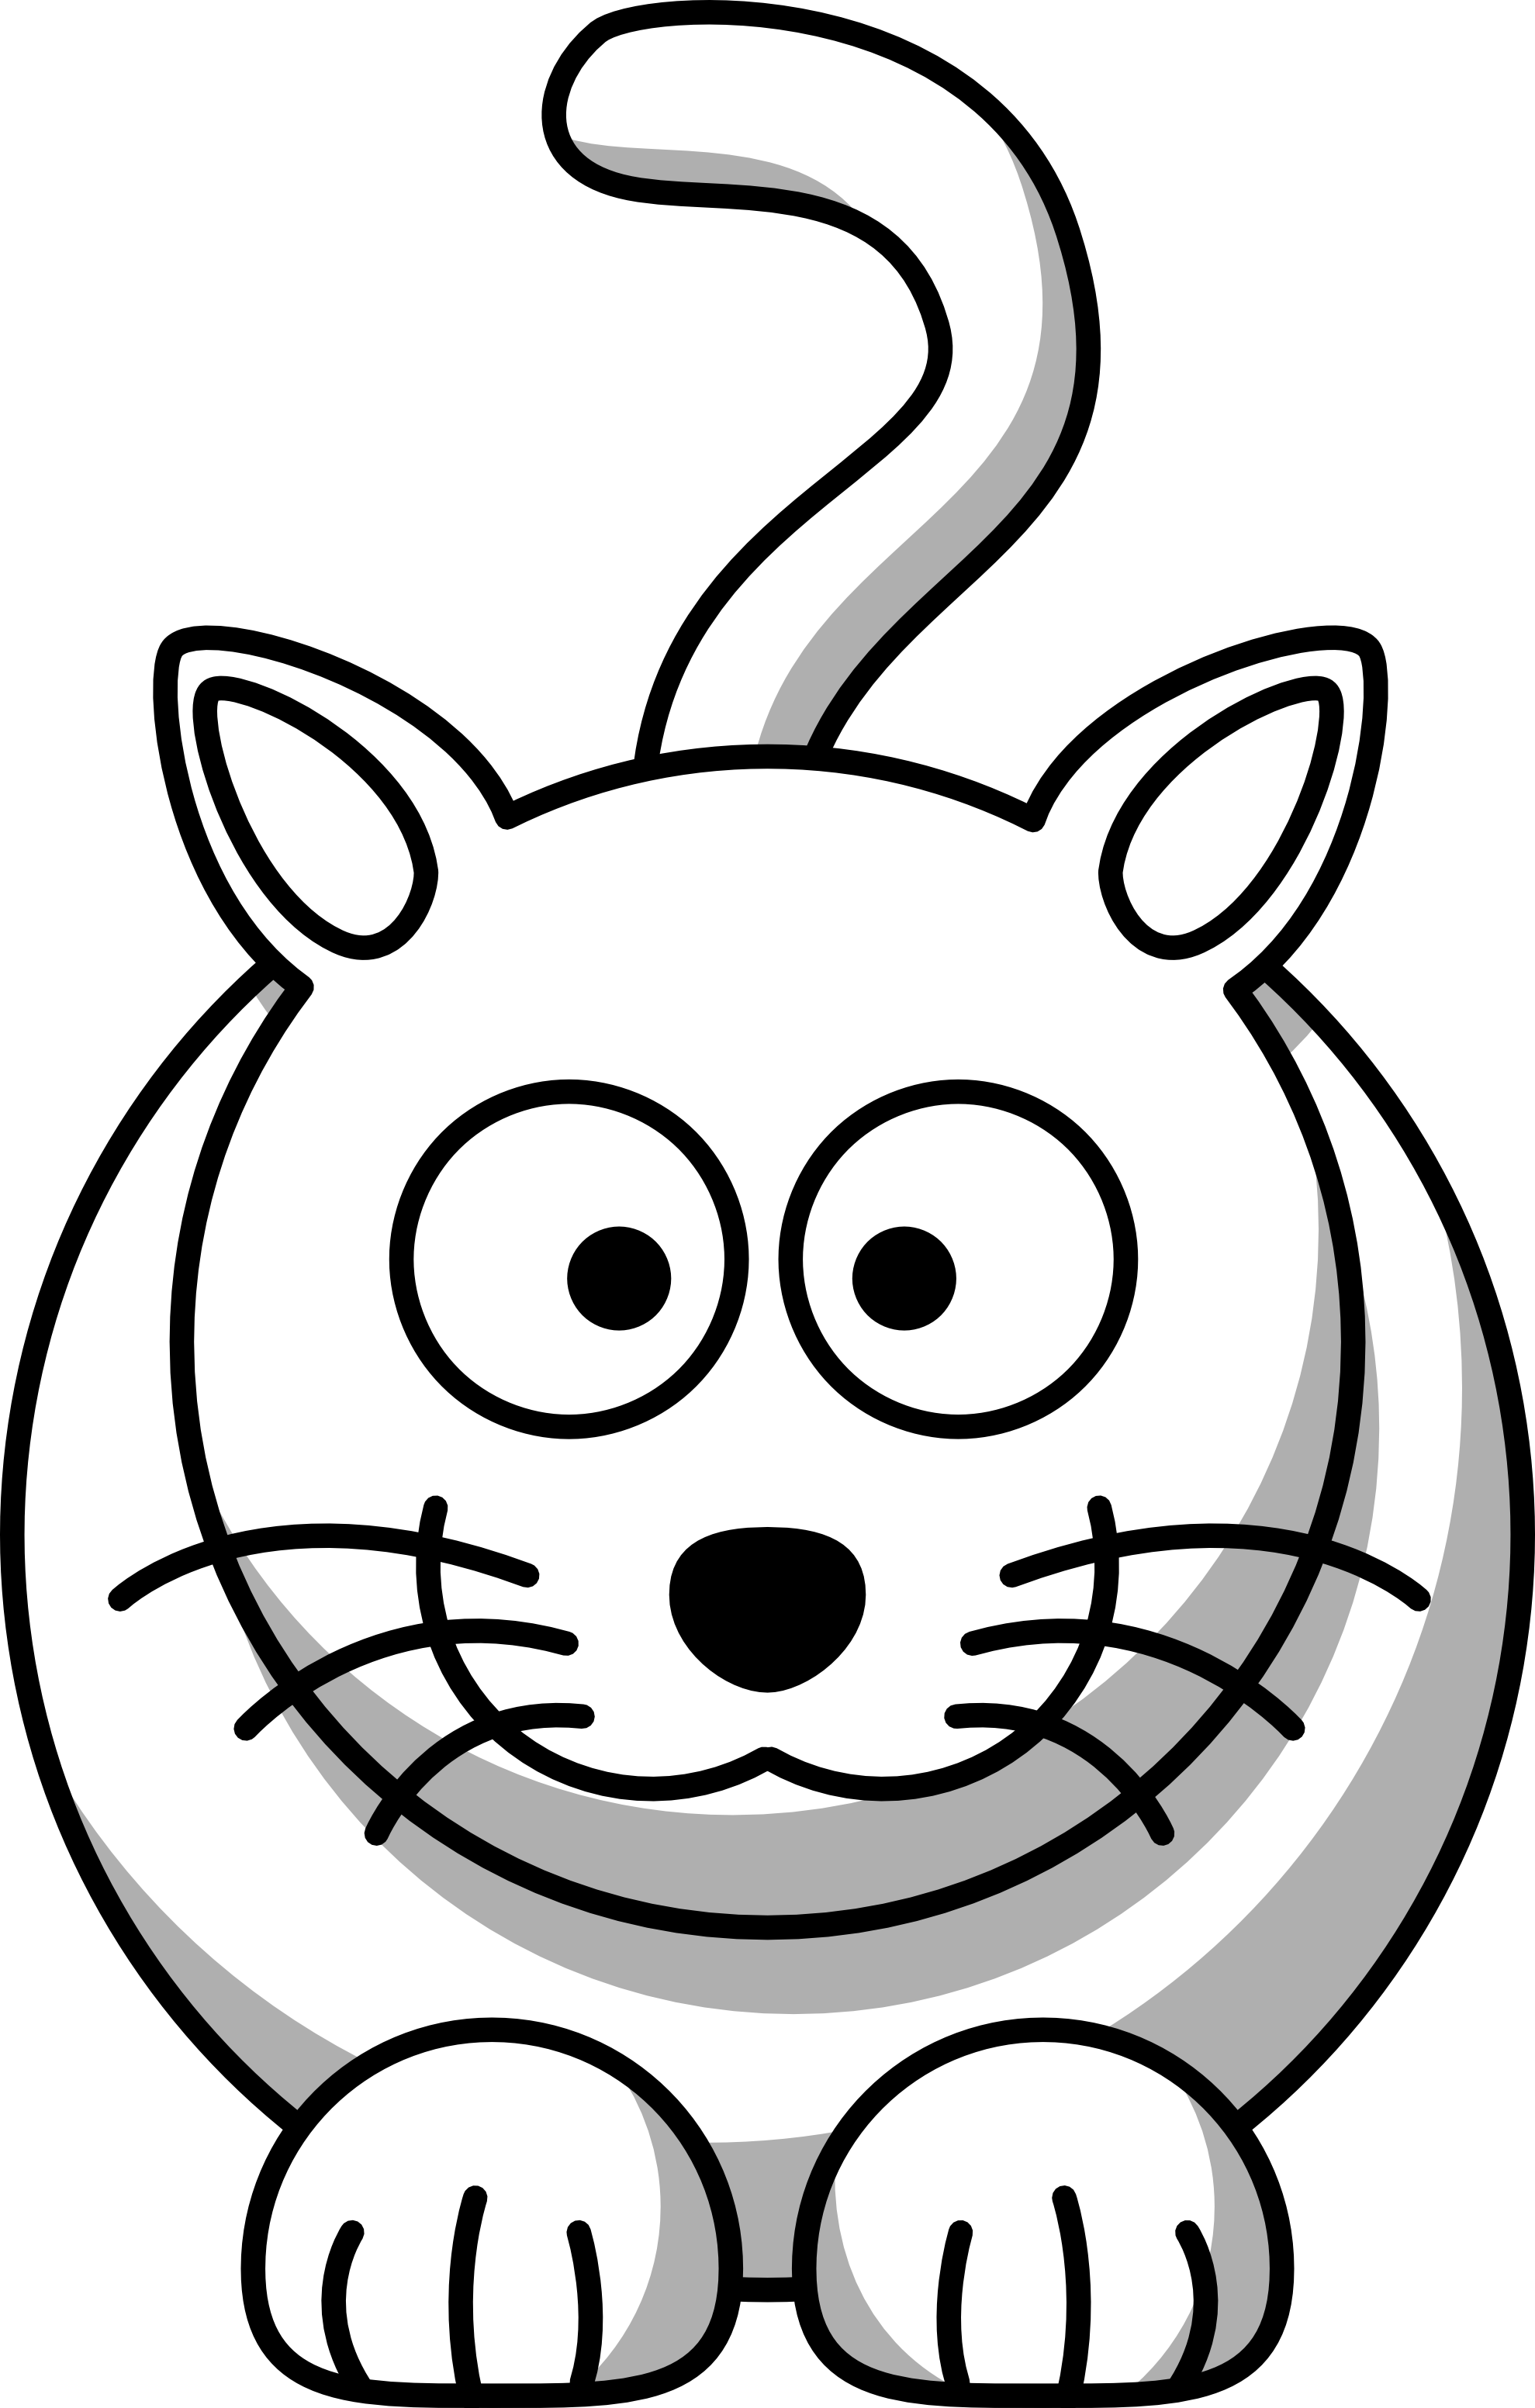 Cartoon Animal Coloring Pages | Coloring Pages